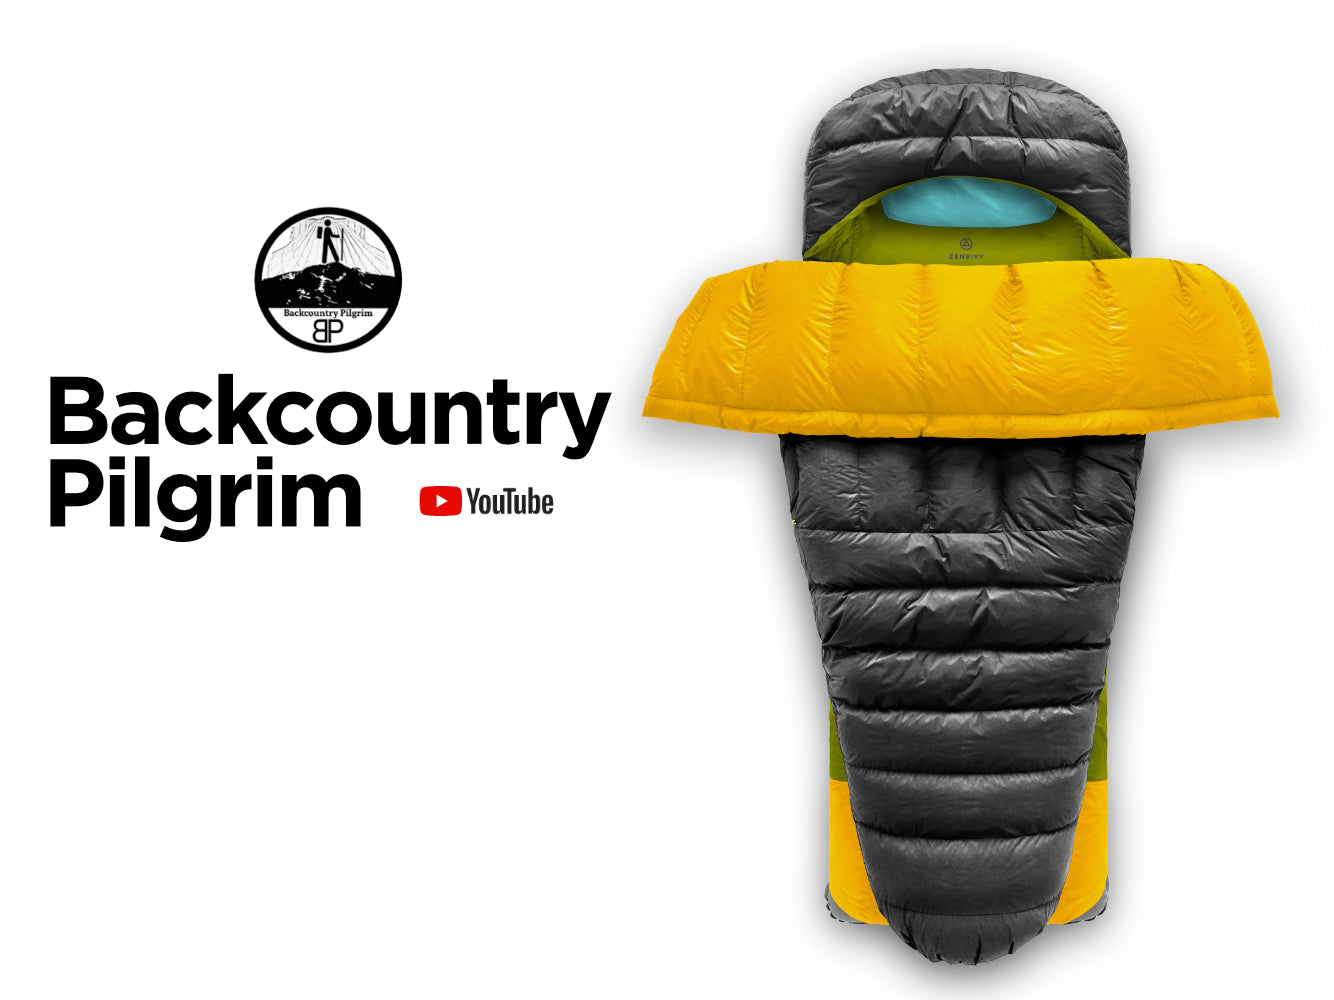 WATCH: Backcountry Pilgrim's thoughts on the Light Bed